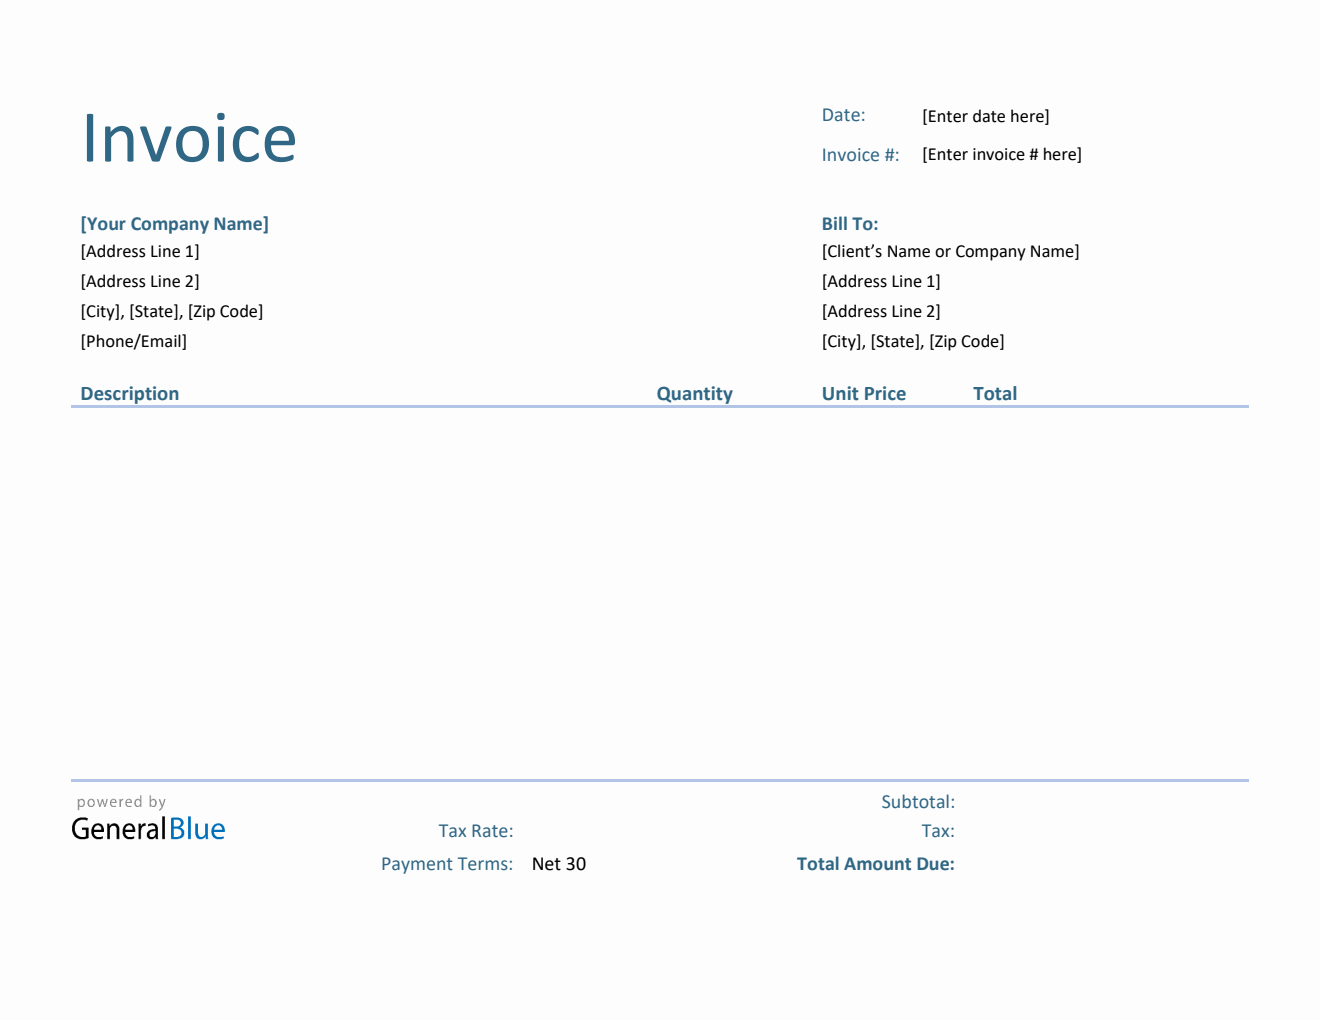 Simple Invoice with Tax in Word (Blue)